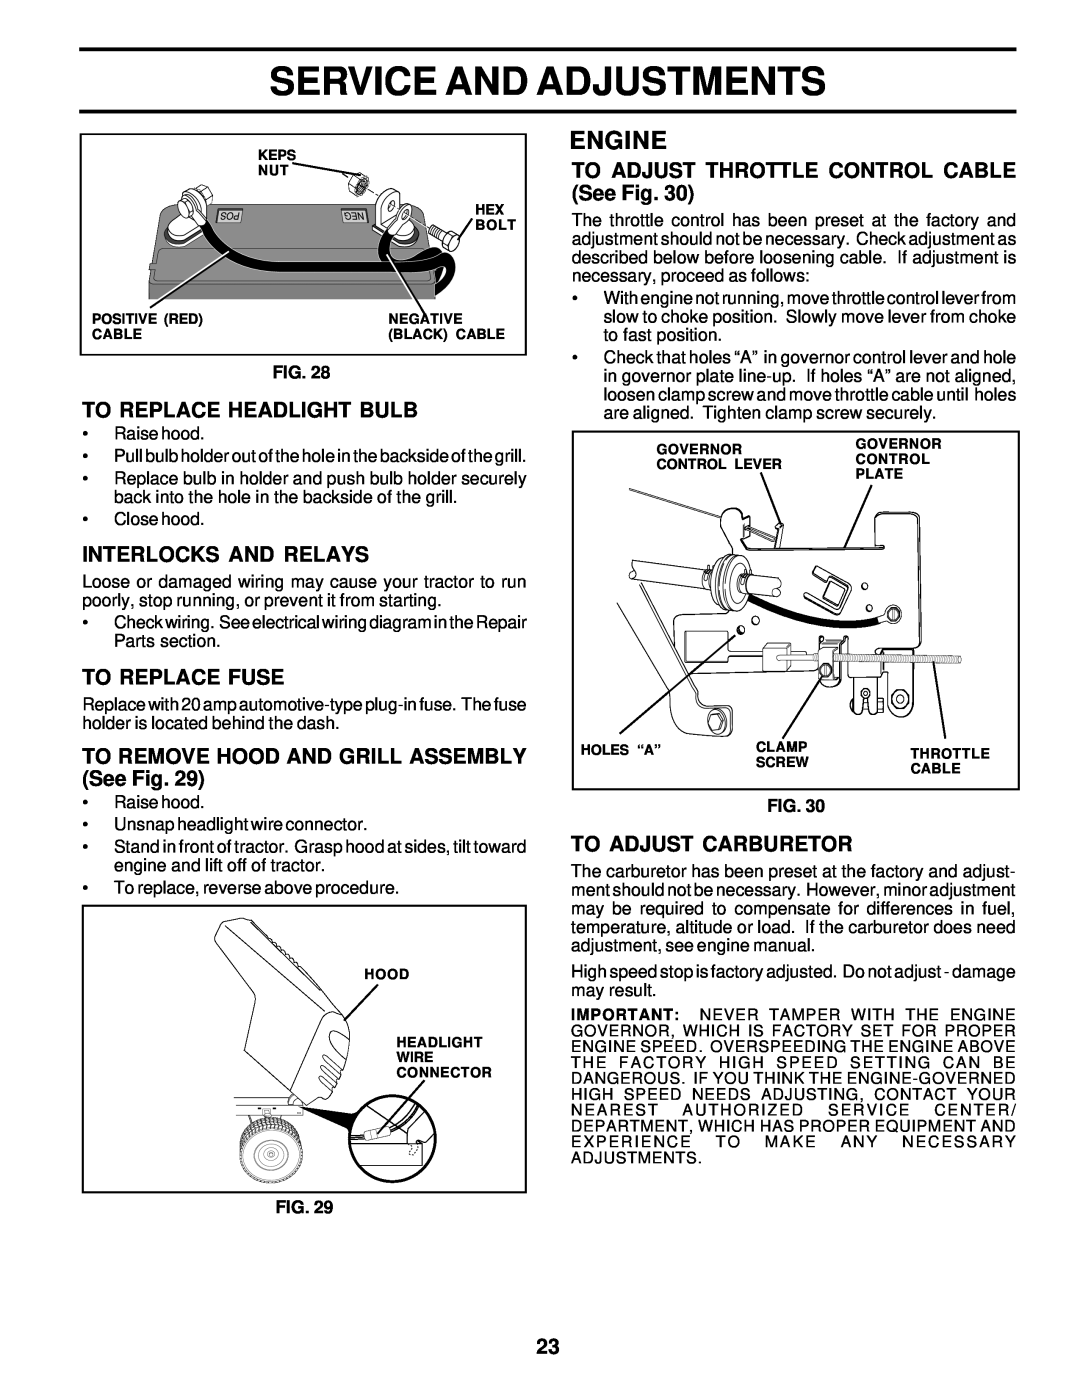 Poulan 176851 To Replace Headlight Bulb, Interlocks And Relays, To Replace Fuse, TO REMOVE HOOD AND GRILL ASSEMBLY See Fig 